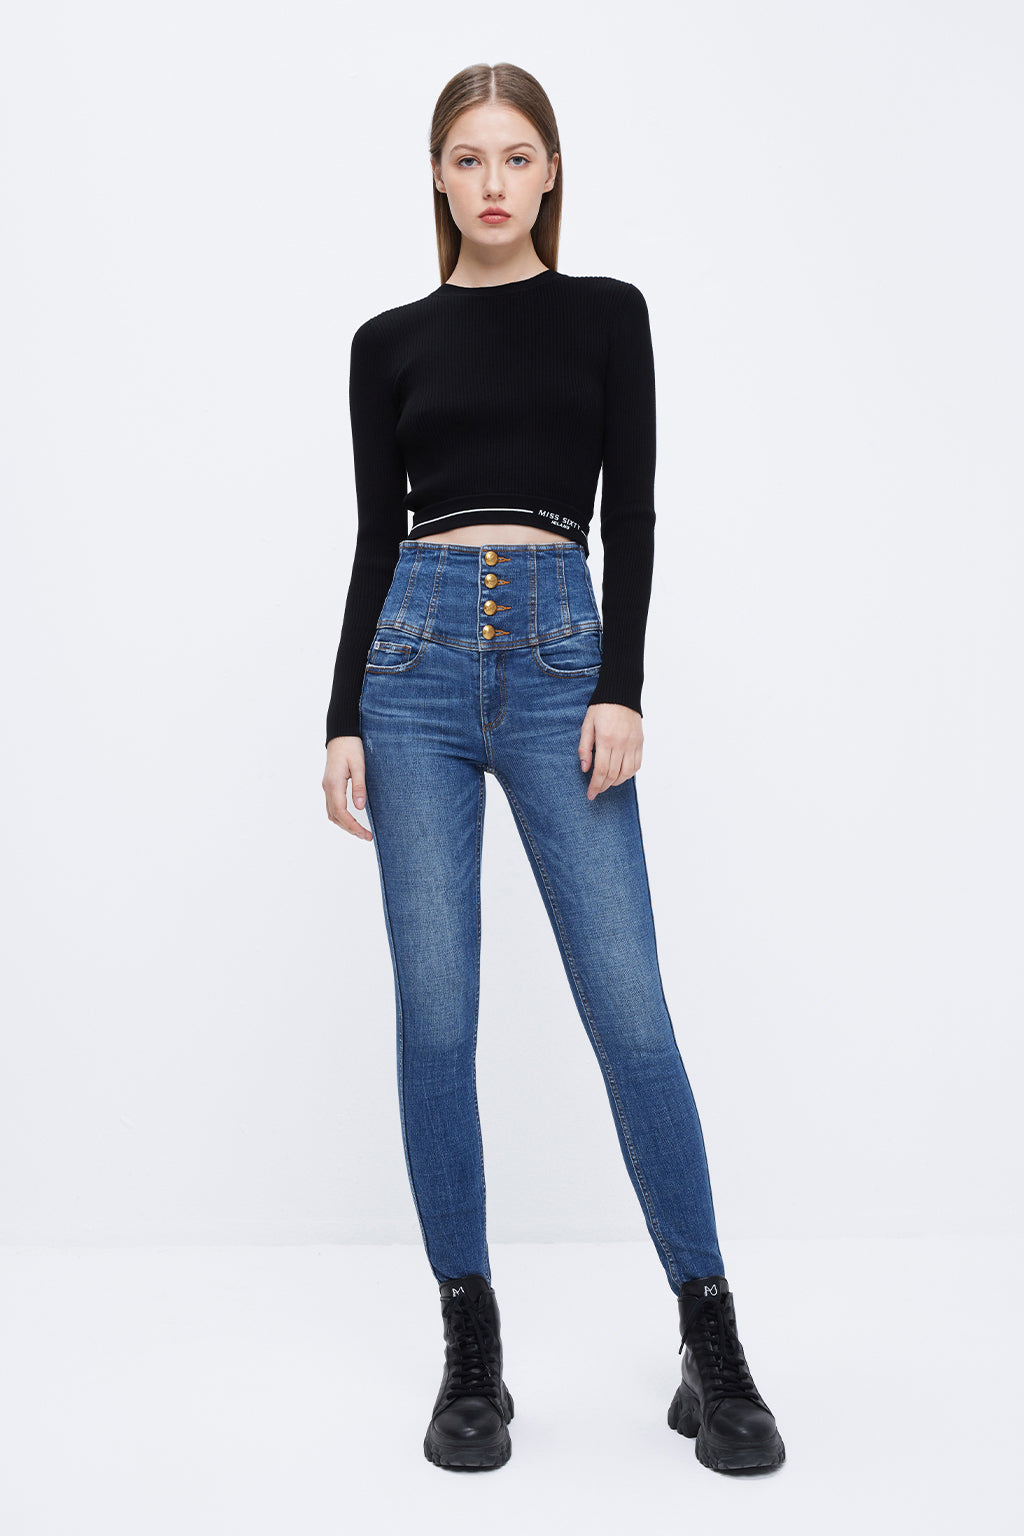 High Waisted Non-Stretch Quality Asymmetrical Waist and Hollow out